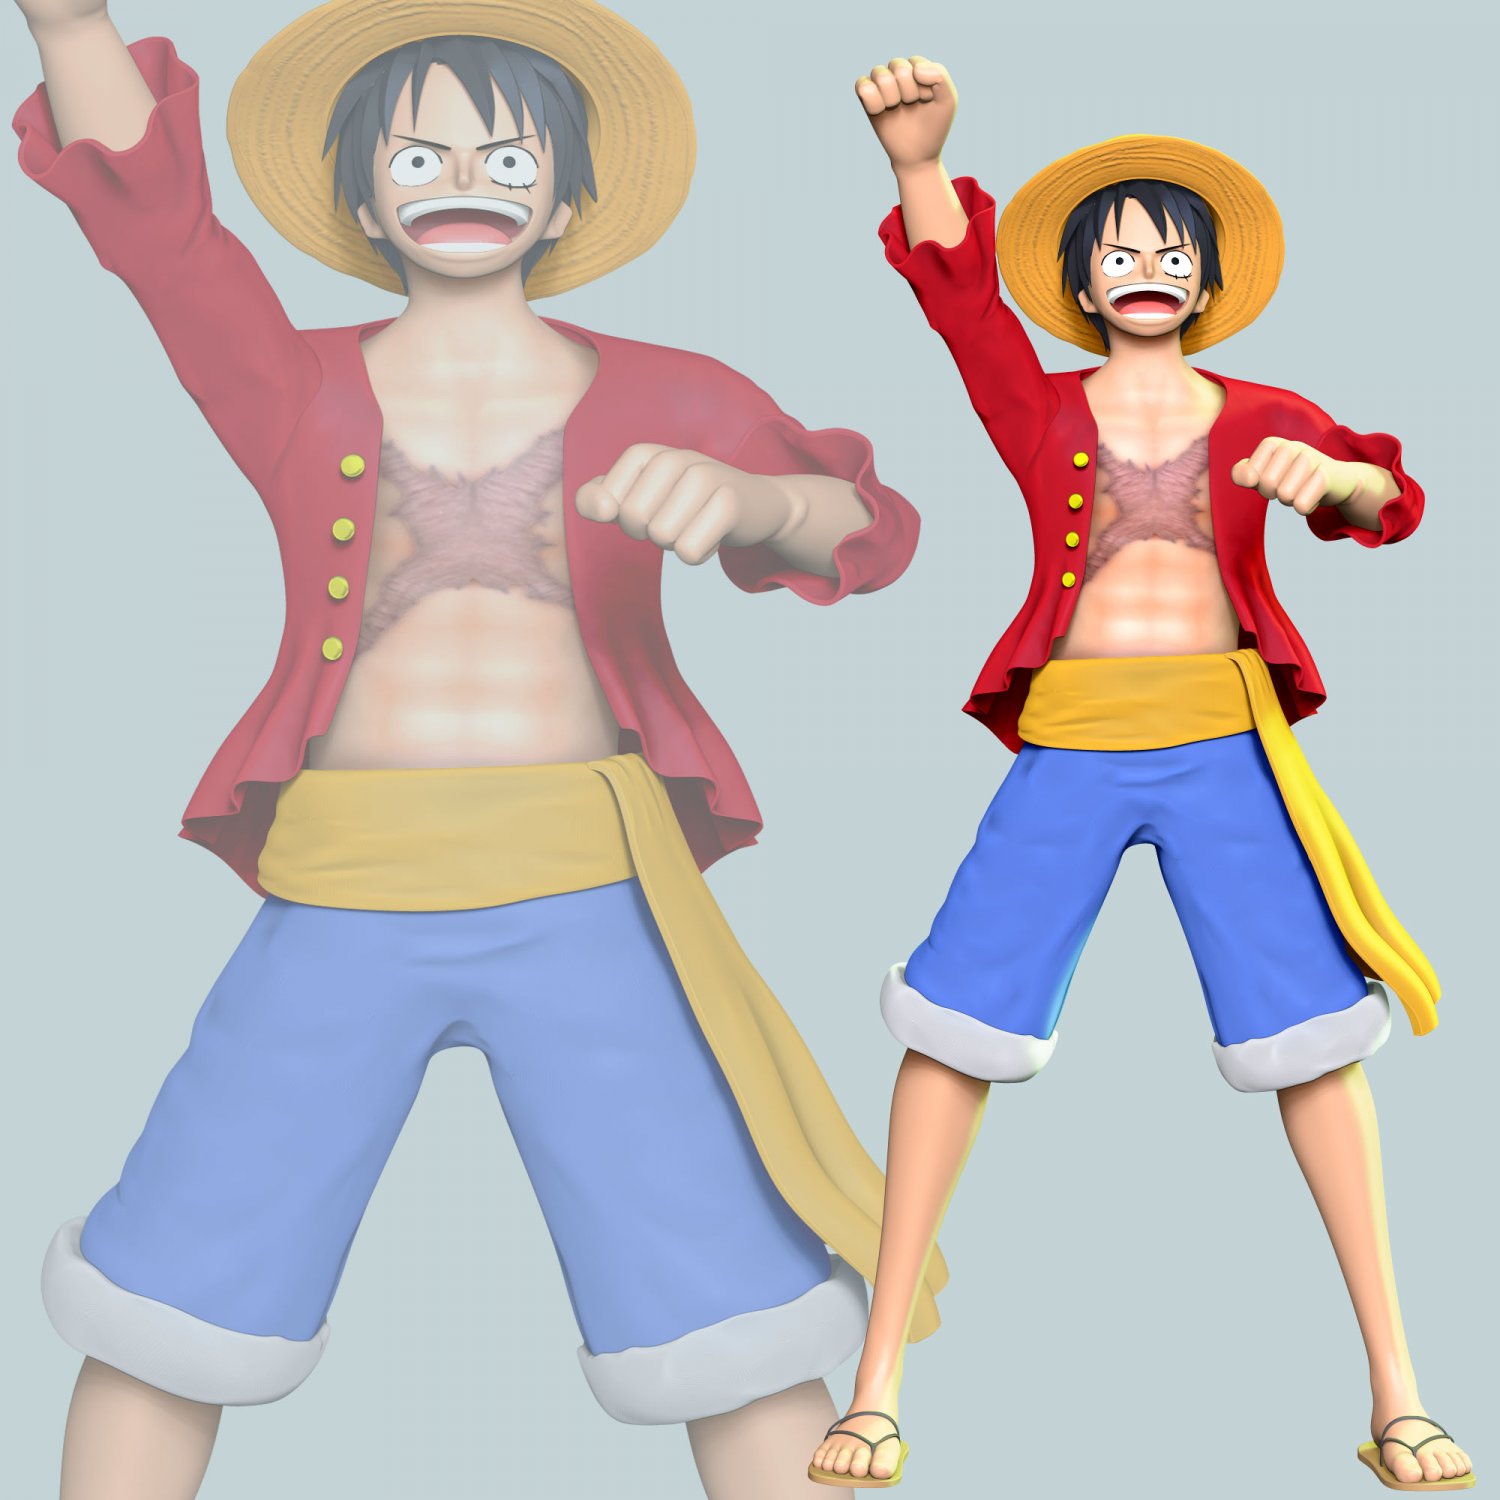 125 One Piece Luffy Gear Images, Stock Photos, 3D objects